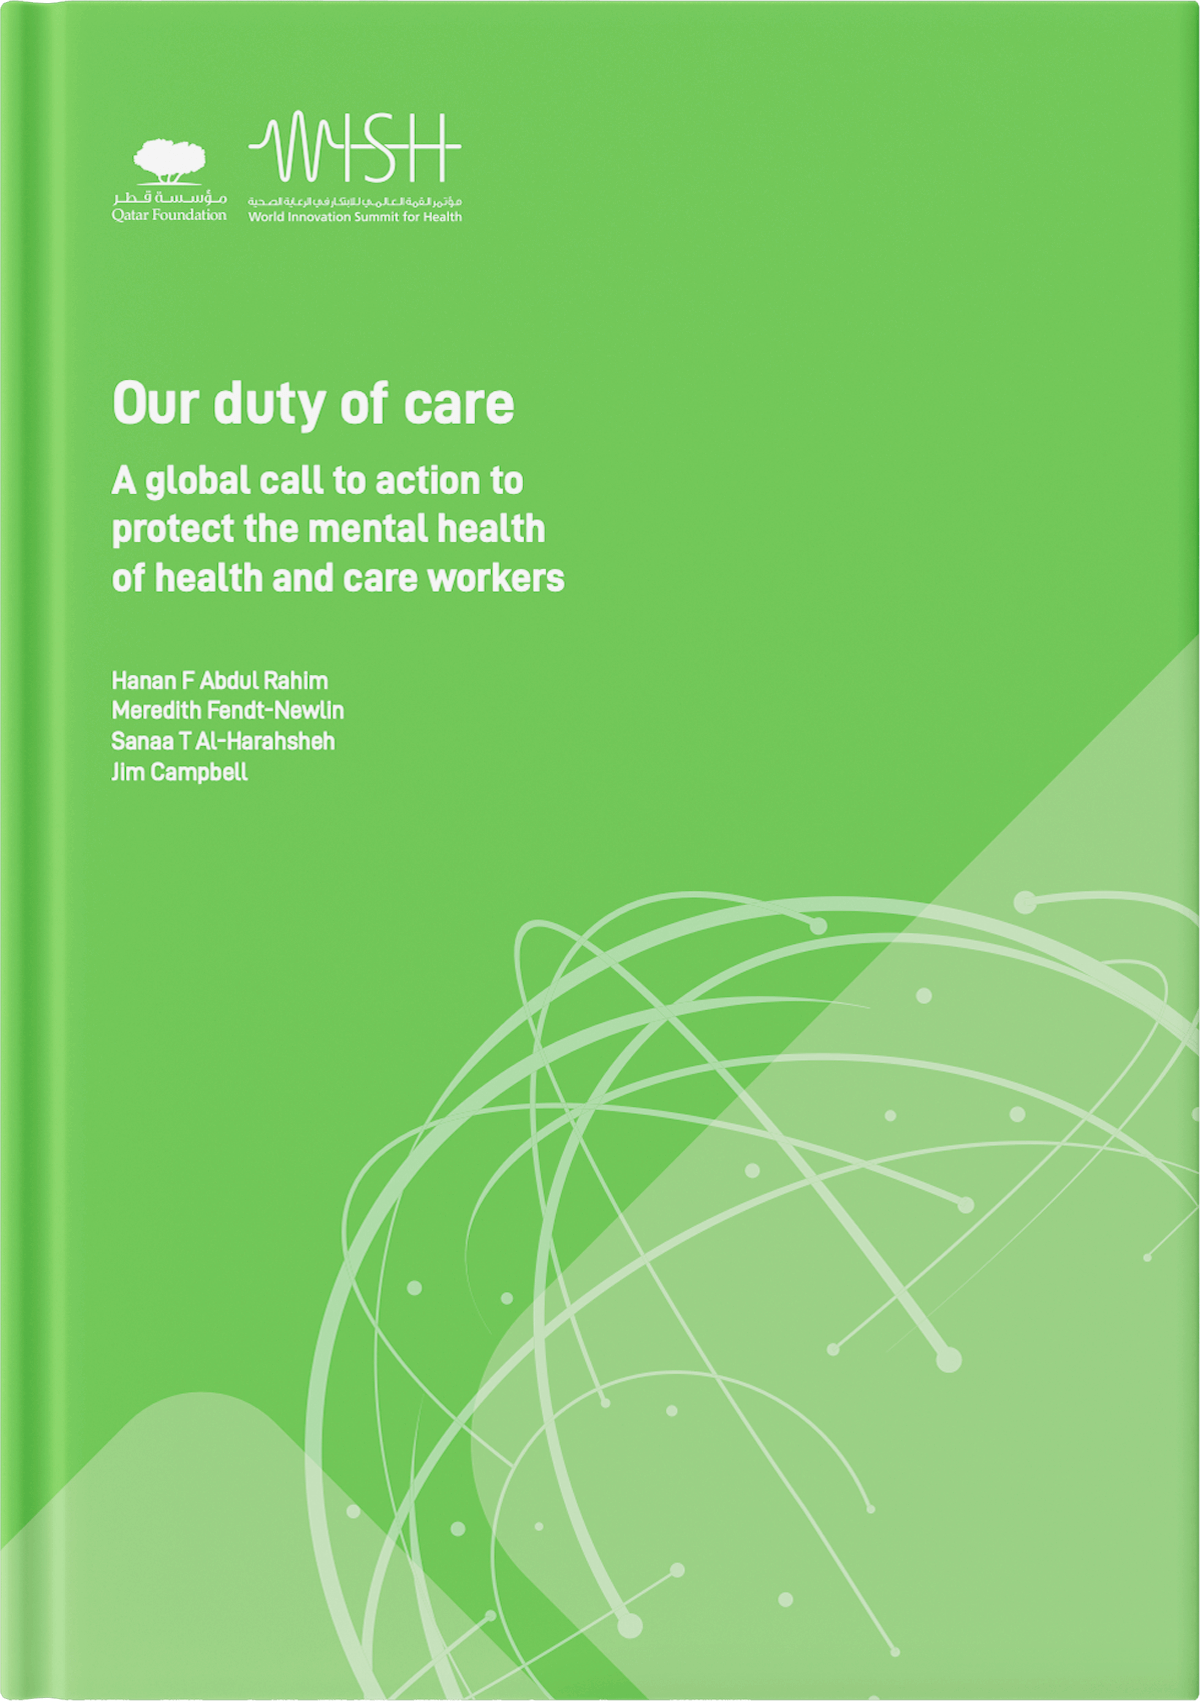 A global call to action to protect the mental health of health and care workers